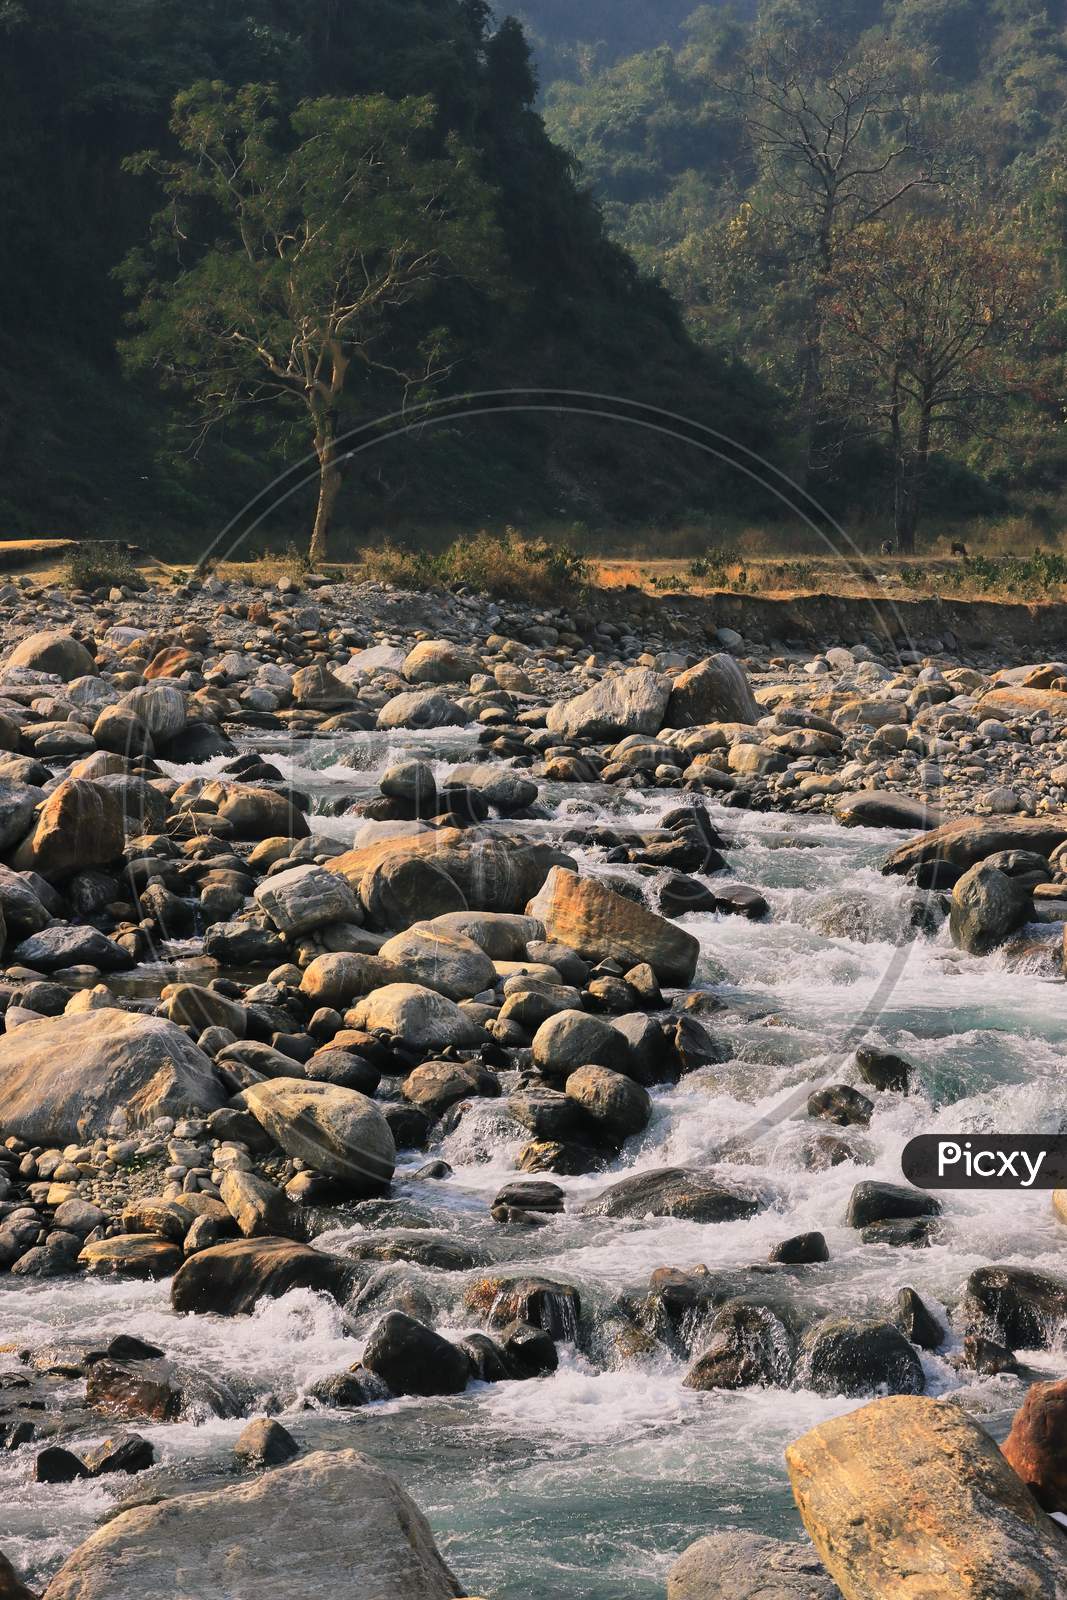 mountain stream (balason river) flowing down to the gangetic plain from himalayan foothills in the terai region of west bengal, india